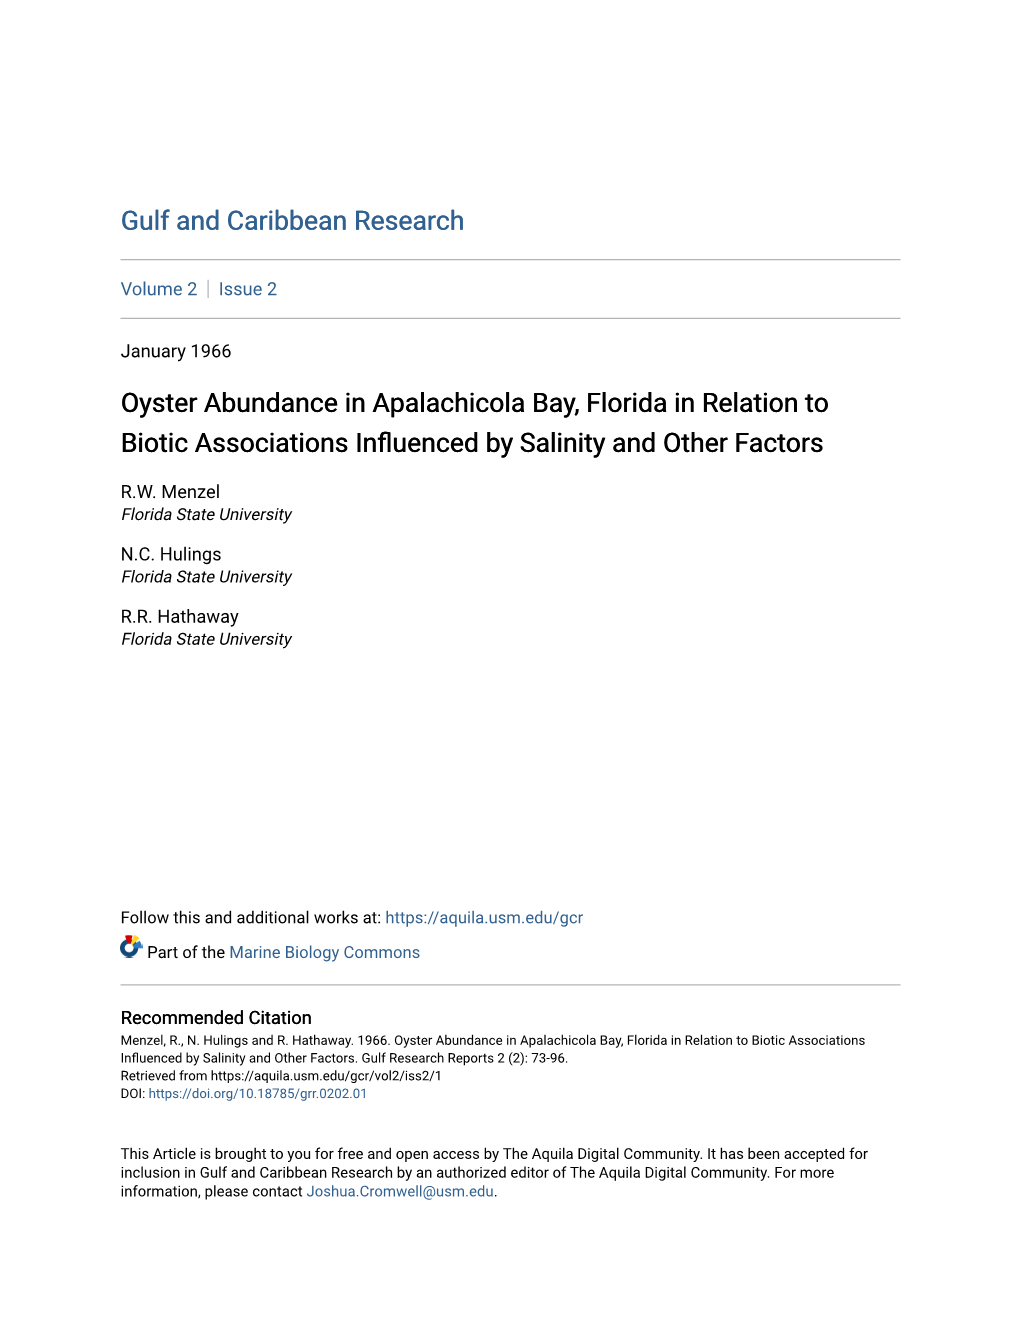 Oyster Abundance in Apalachicola Bay, Florida in Relation to Biotic Associations Influenced by Salinity and Other Factors